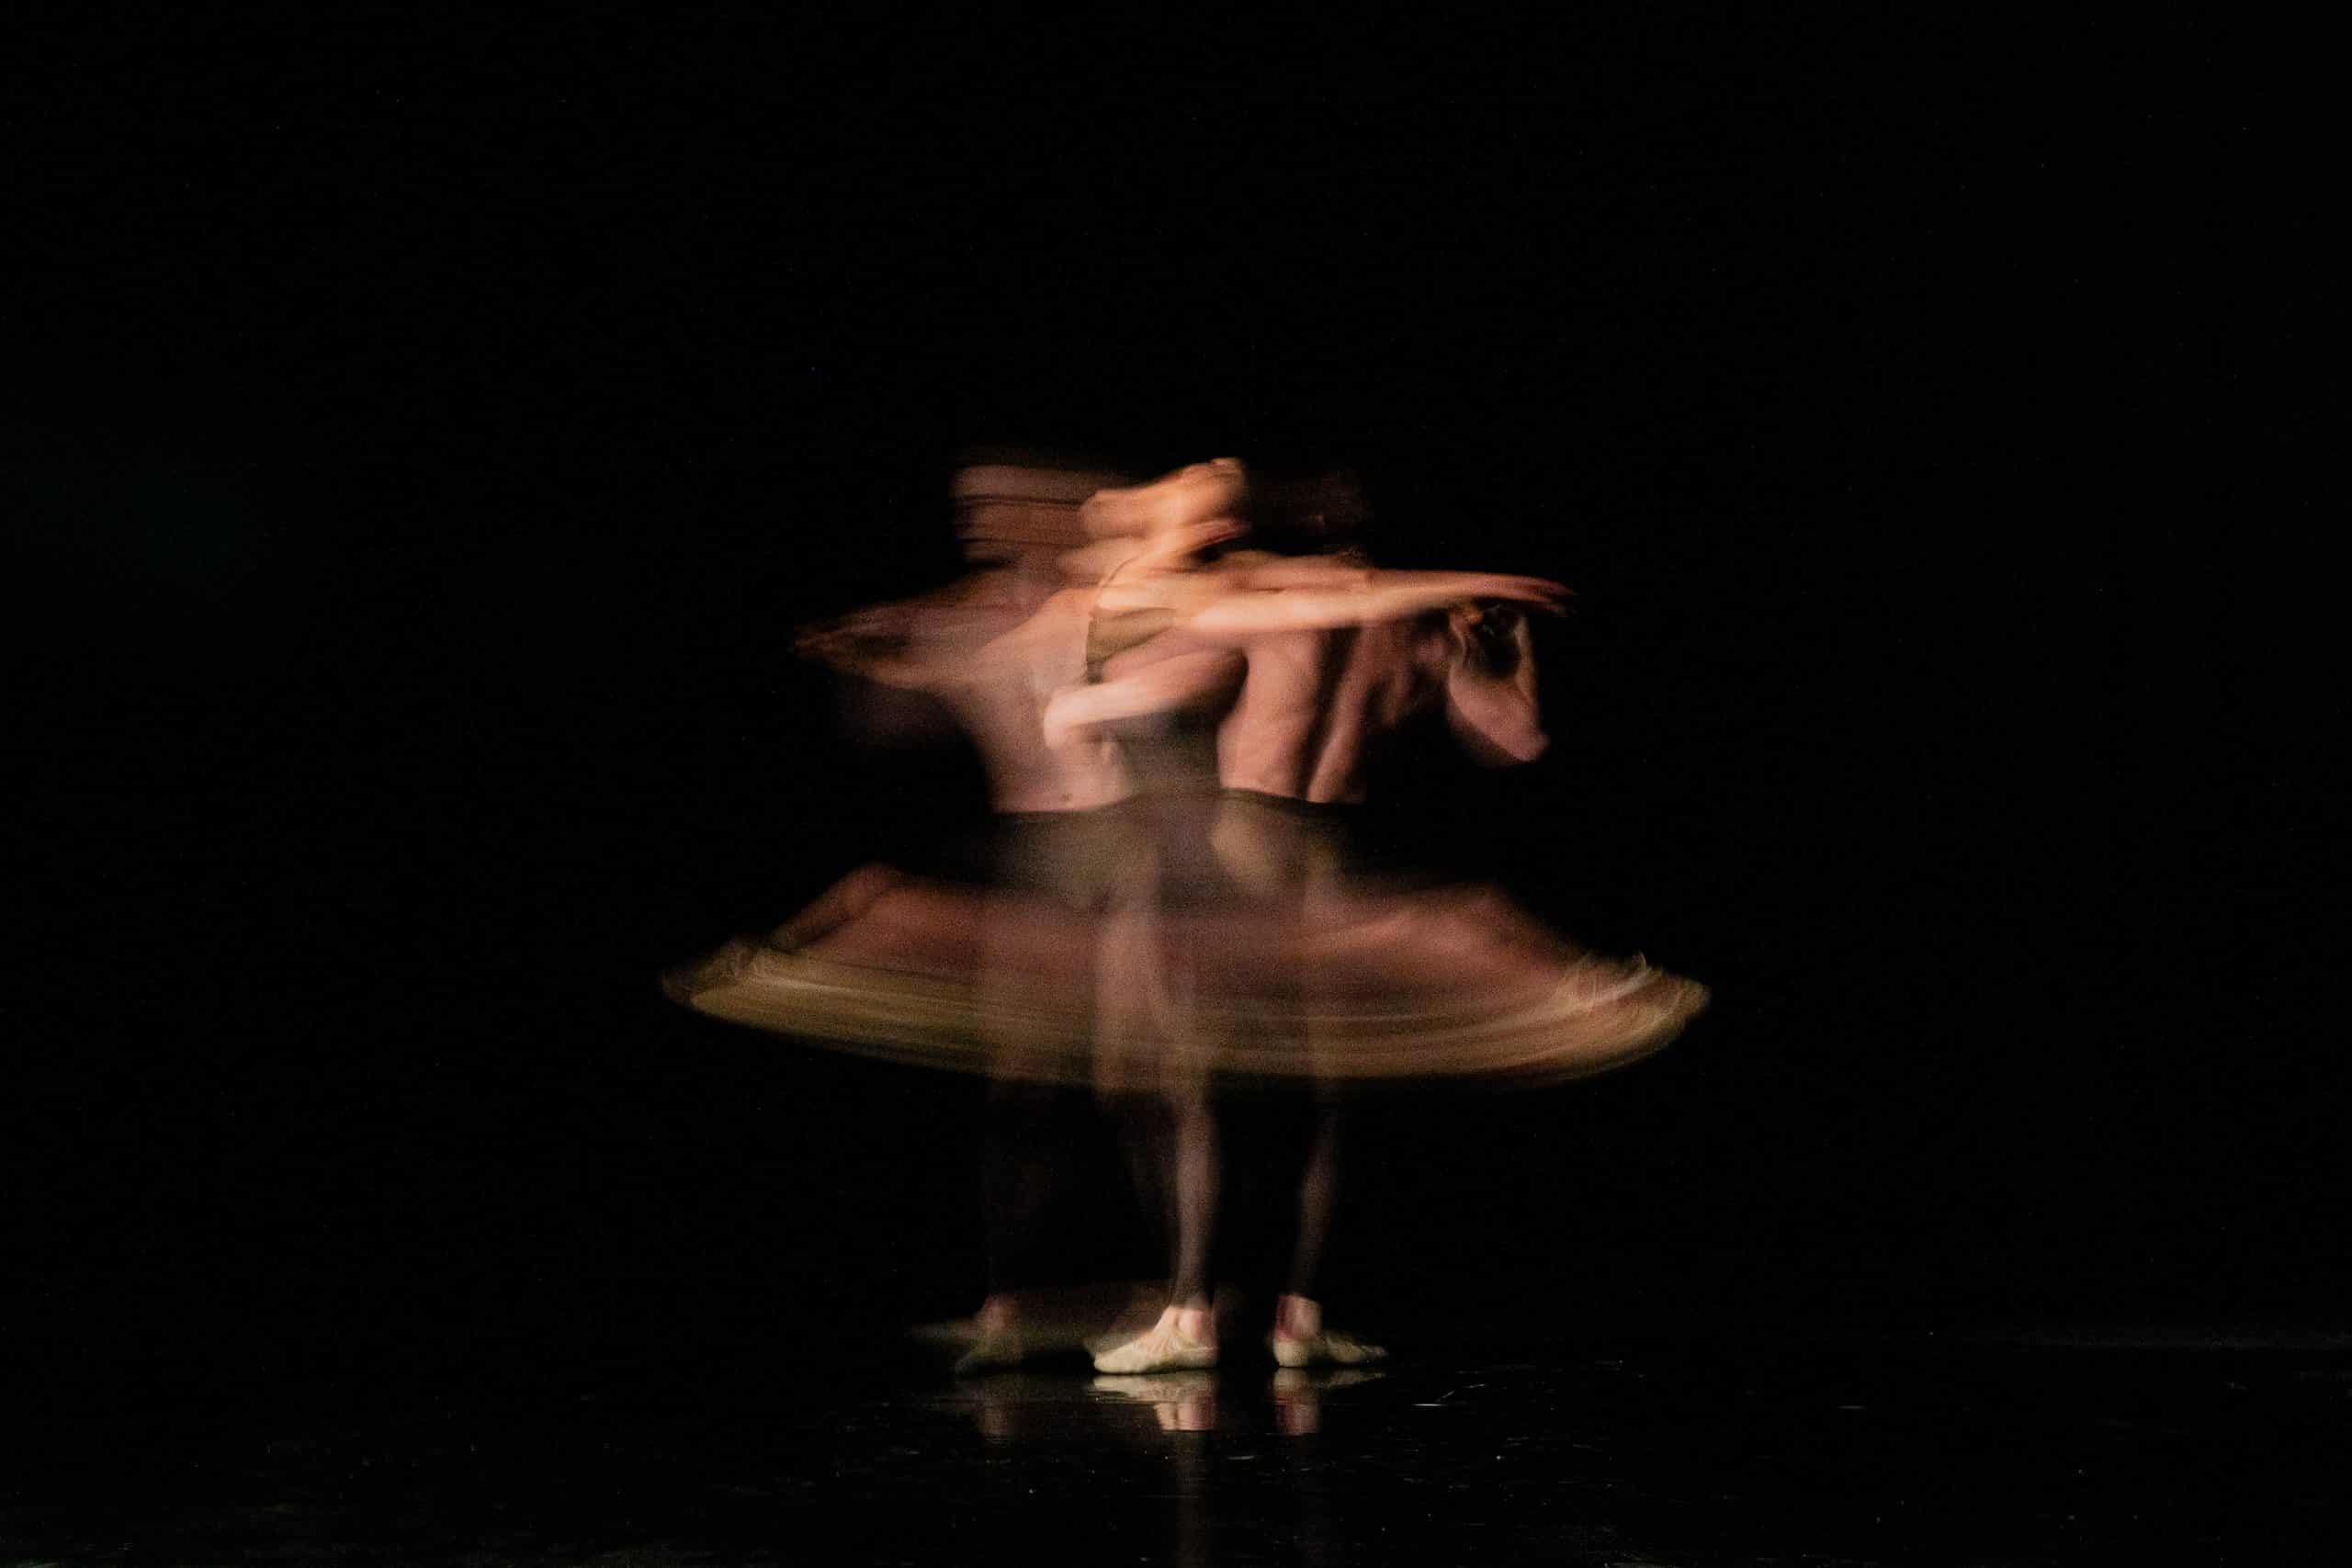 A blurred image of an American Ballet Theatre dancer in mid-twirl on a dark stage, capturing a sense of motion with multiple overlapping silhouettes suggesting rapid spinning.